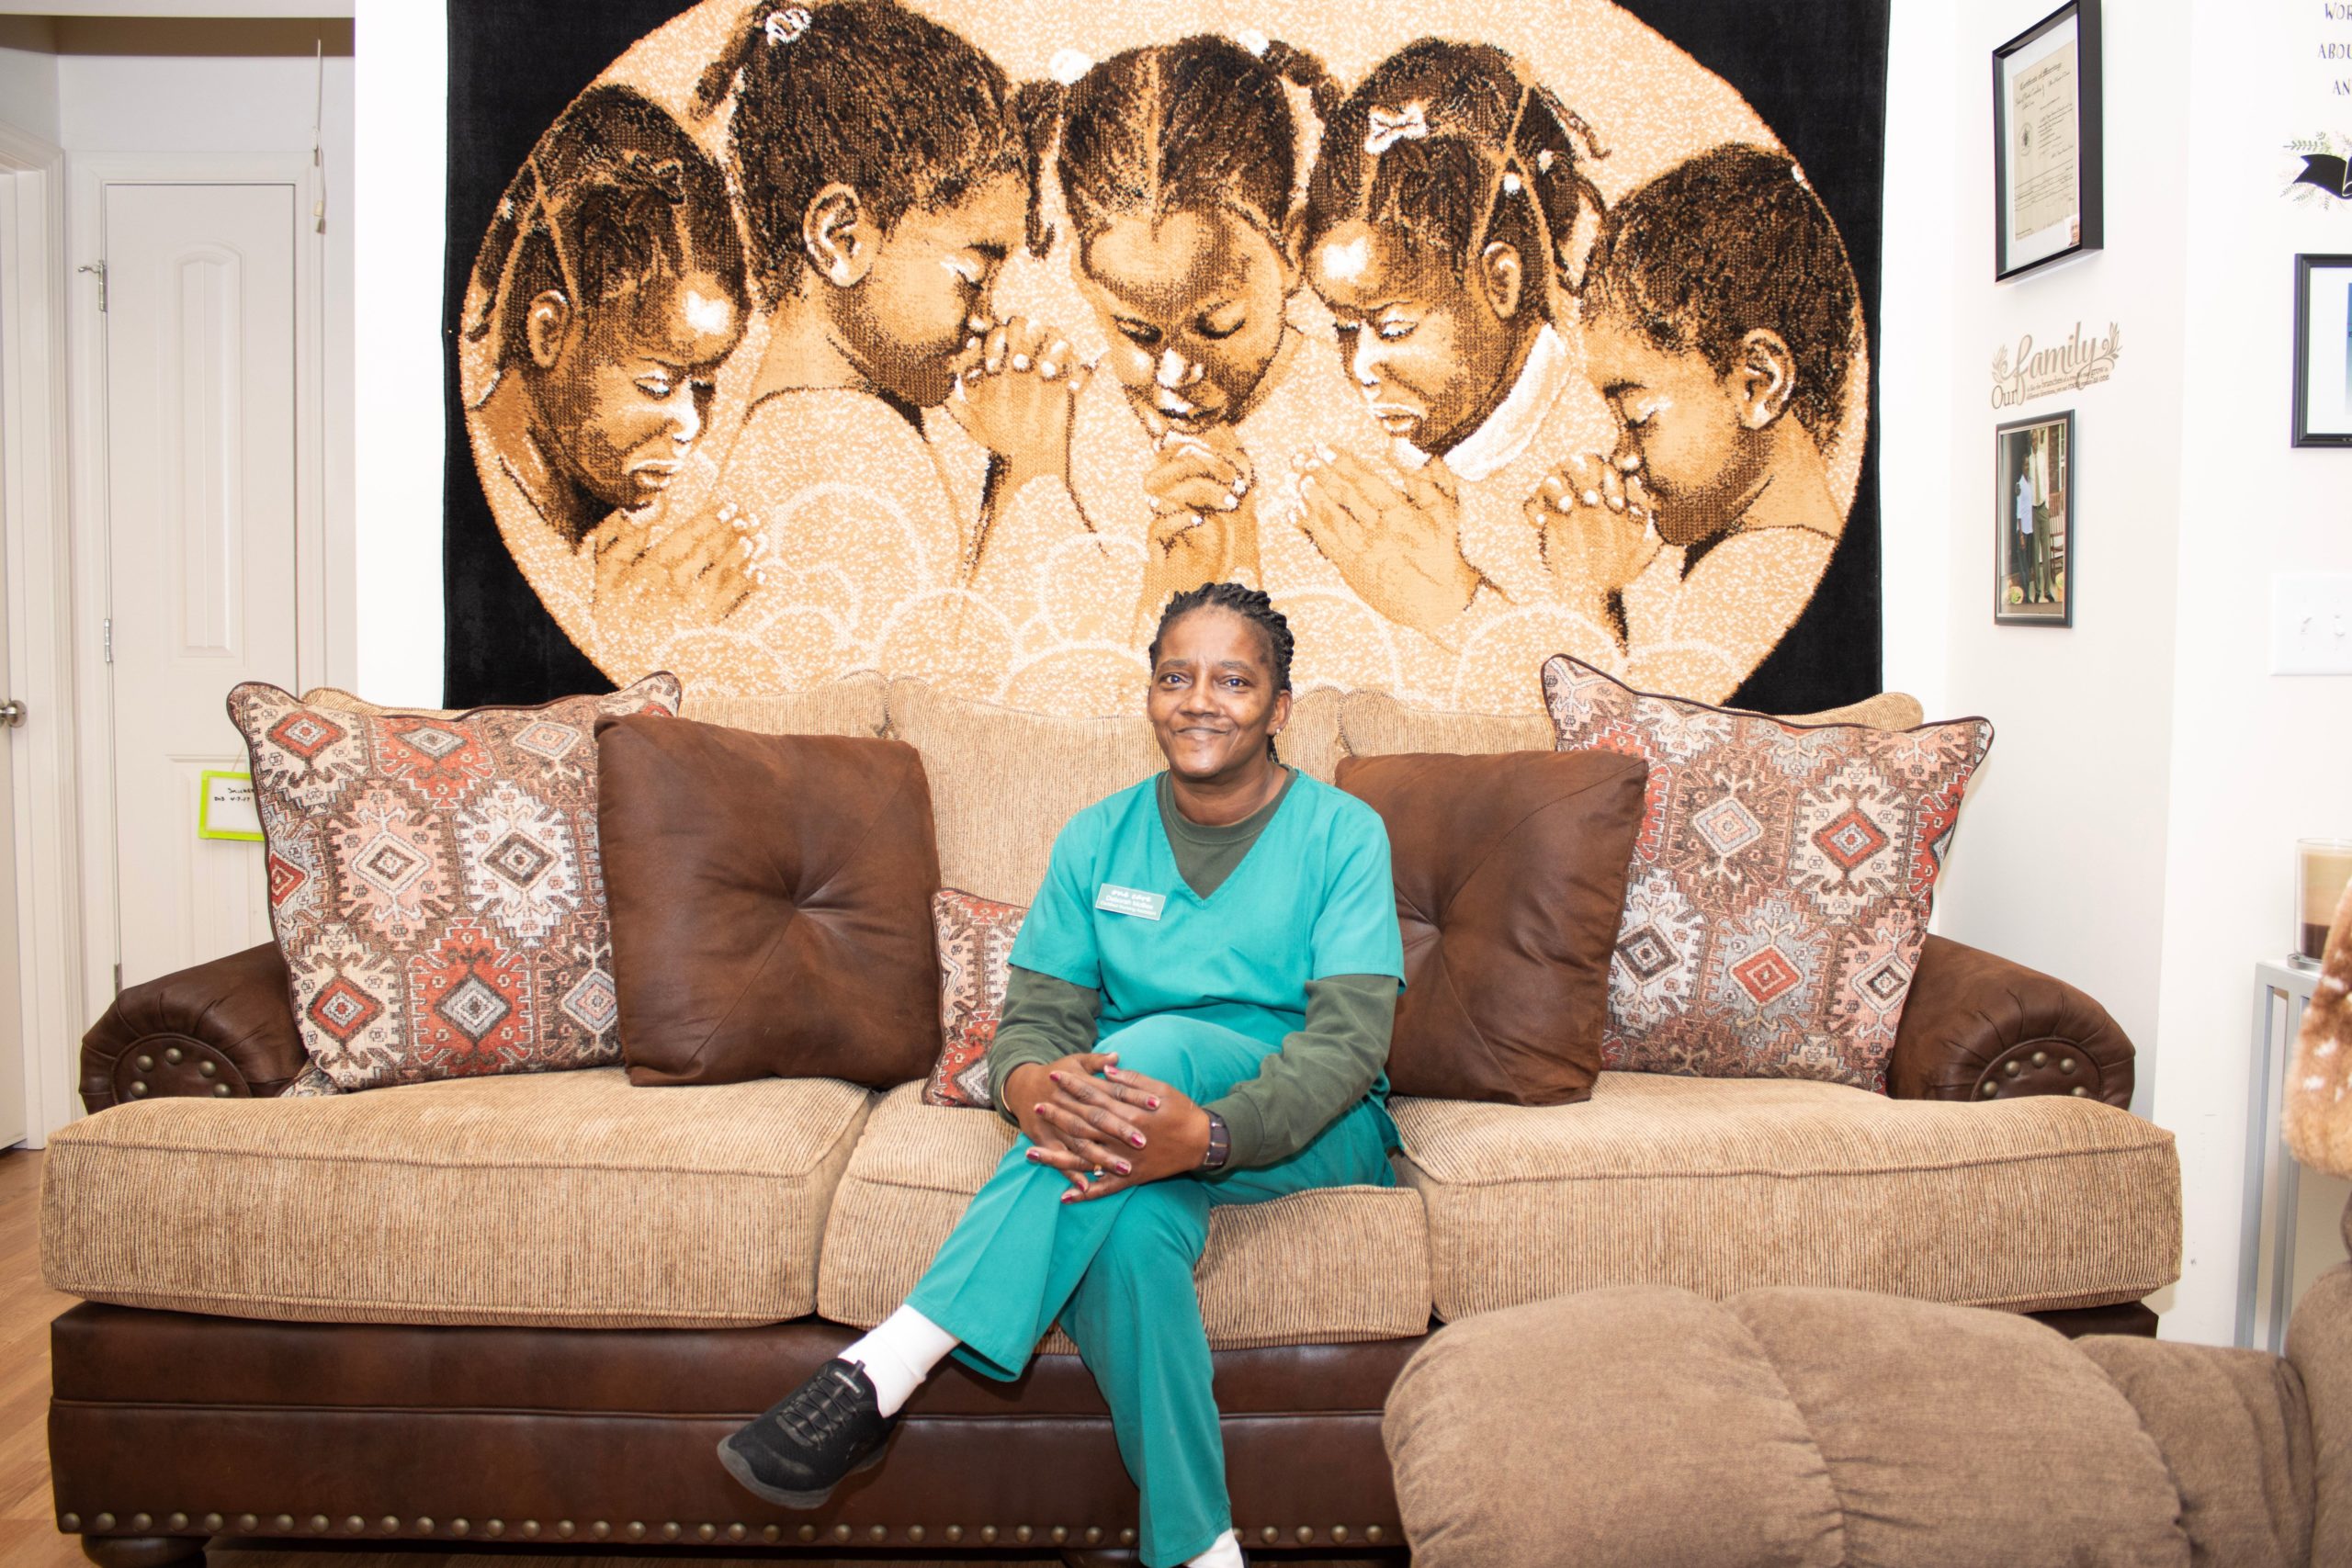 Ms McBee, a home health aide in High Point, NC sits on the couch in her new construction home, a home built through the Pinnacle Financial Partners affordable housing program.